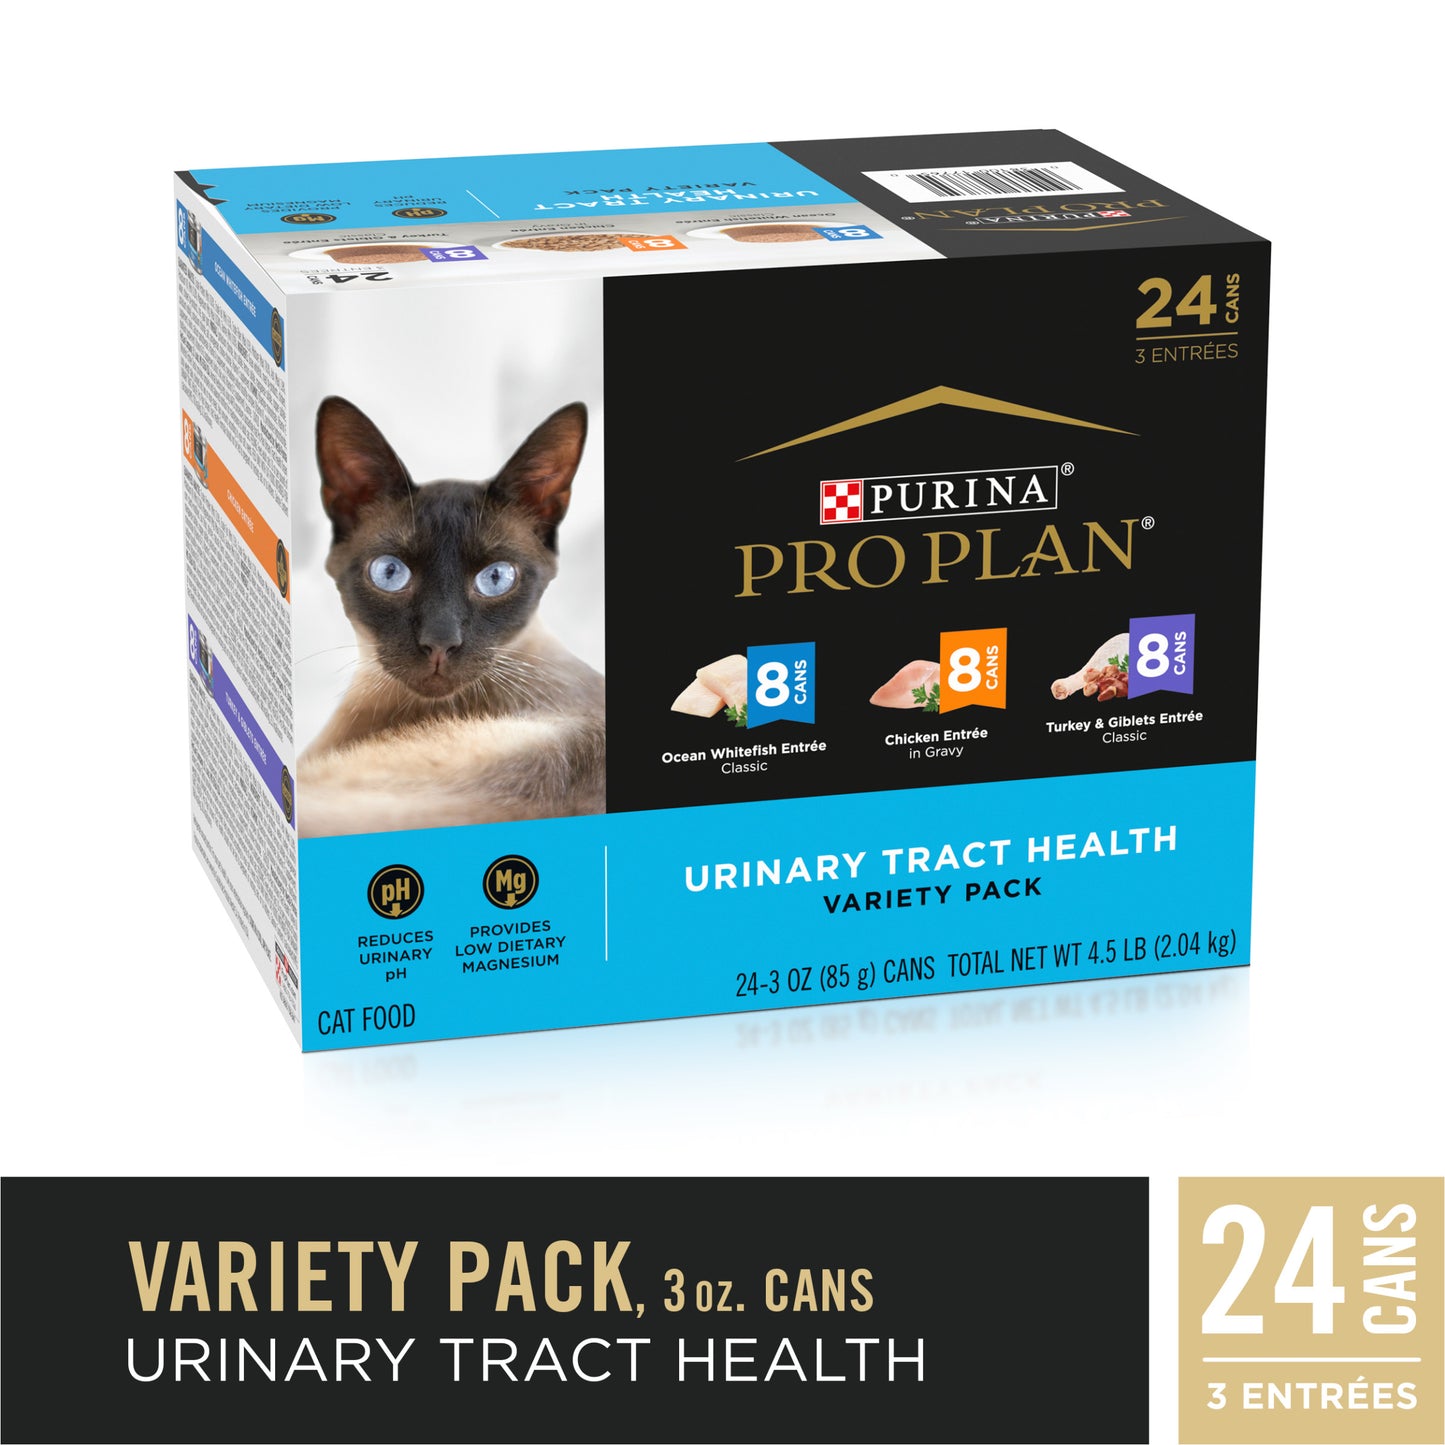 Purina Pro Plan Urinary Tract Health Chicken, Ocean Whitefish, Turkey & Giblets Wet Cat Food Variety Pack 24 Count